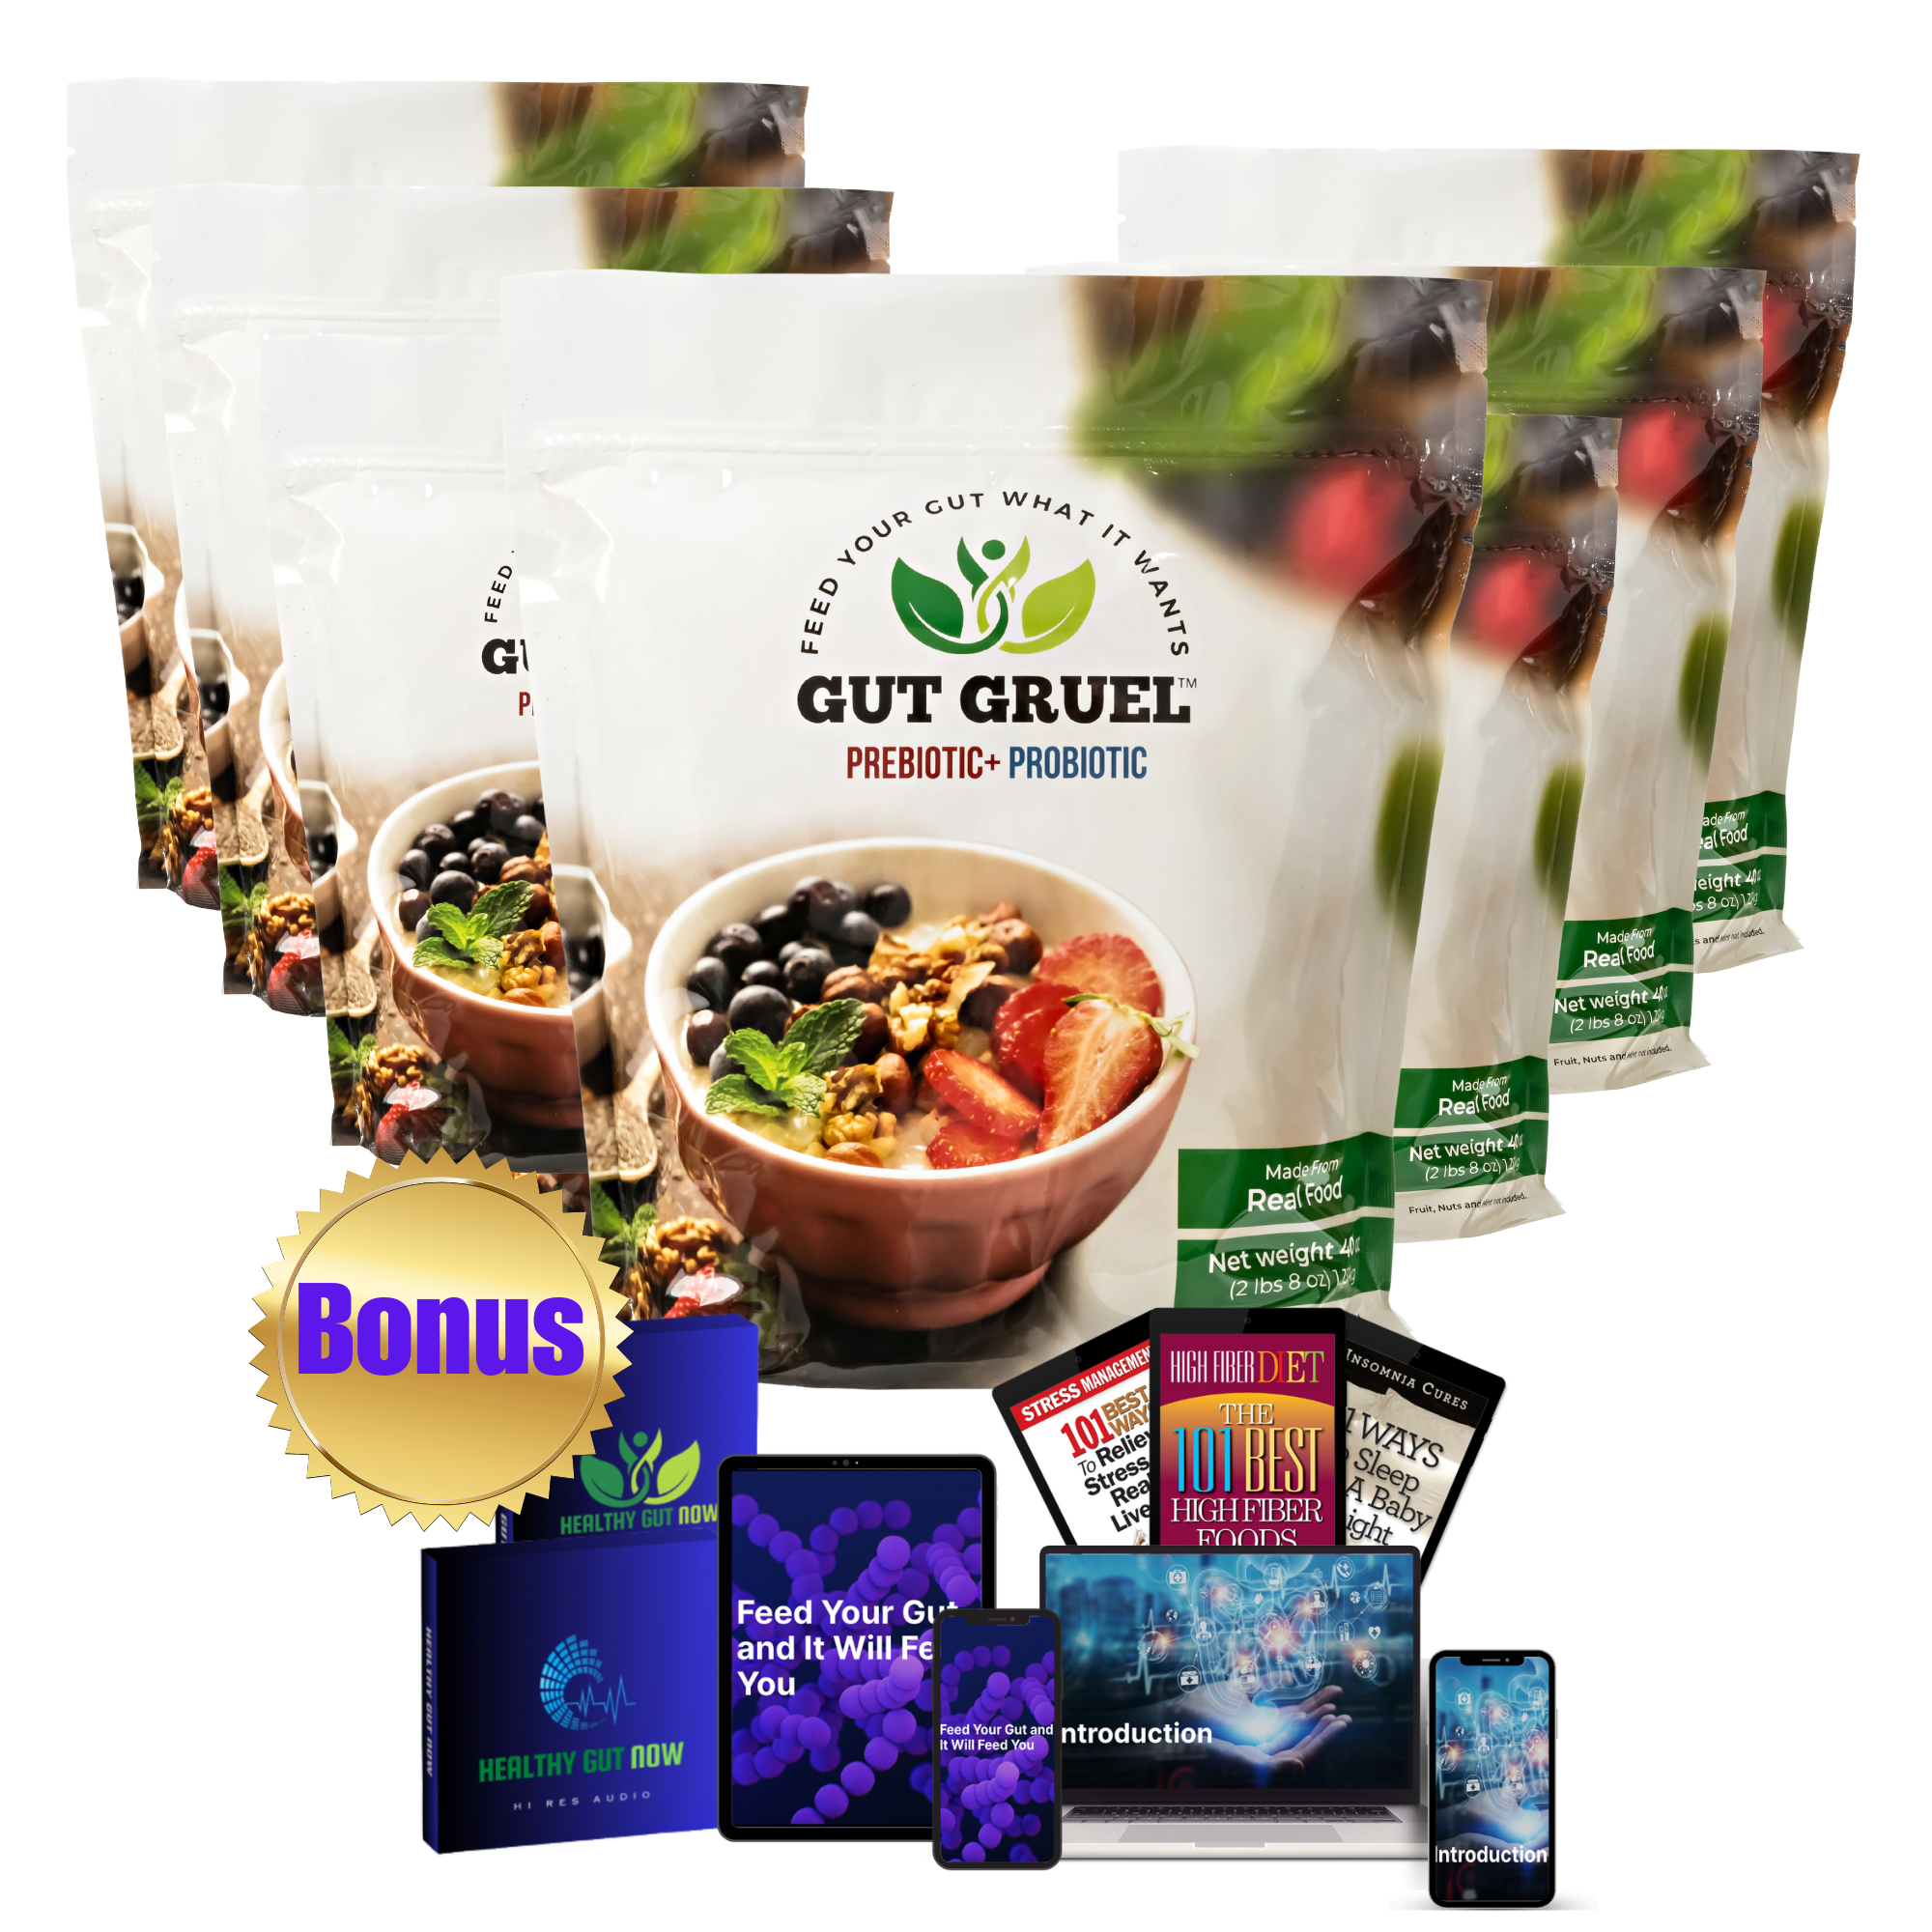 Image of 6 pack of Gut Gruel and bonuses